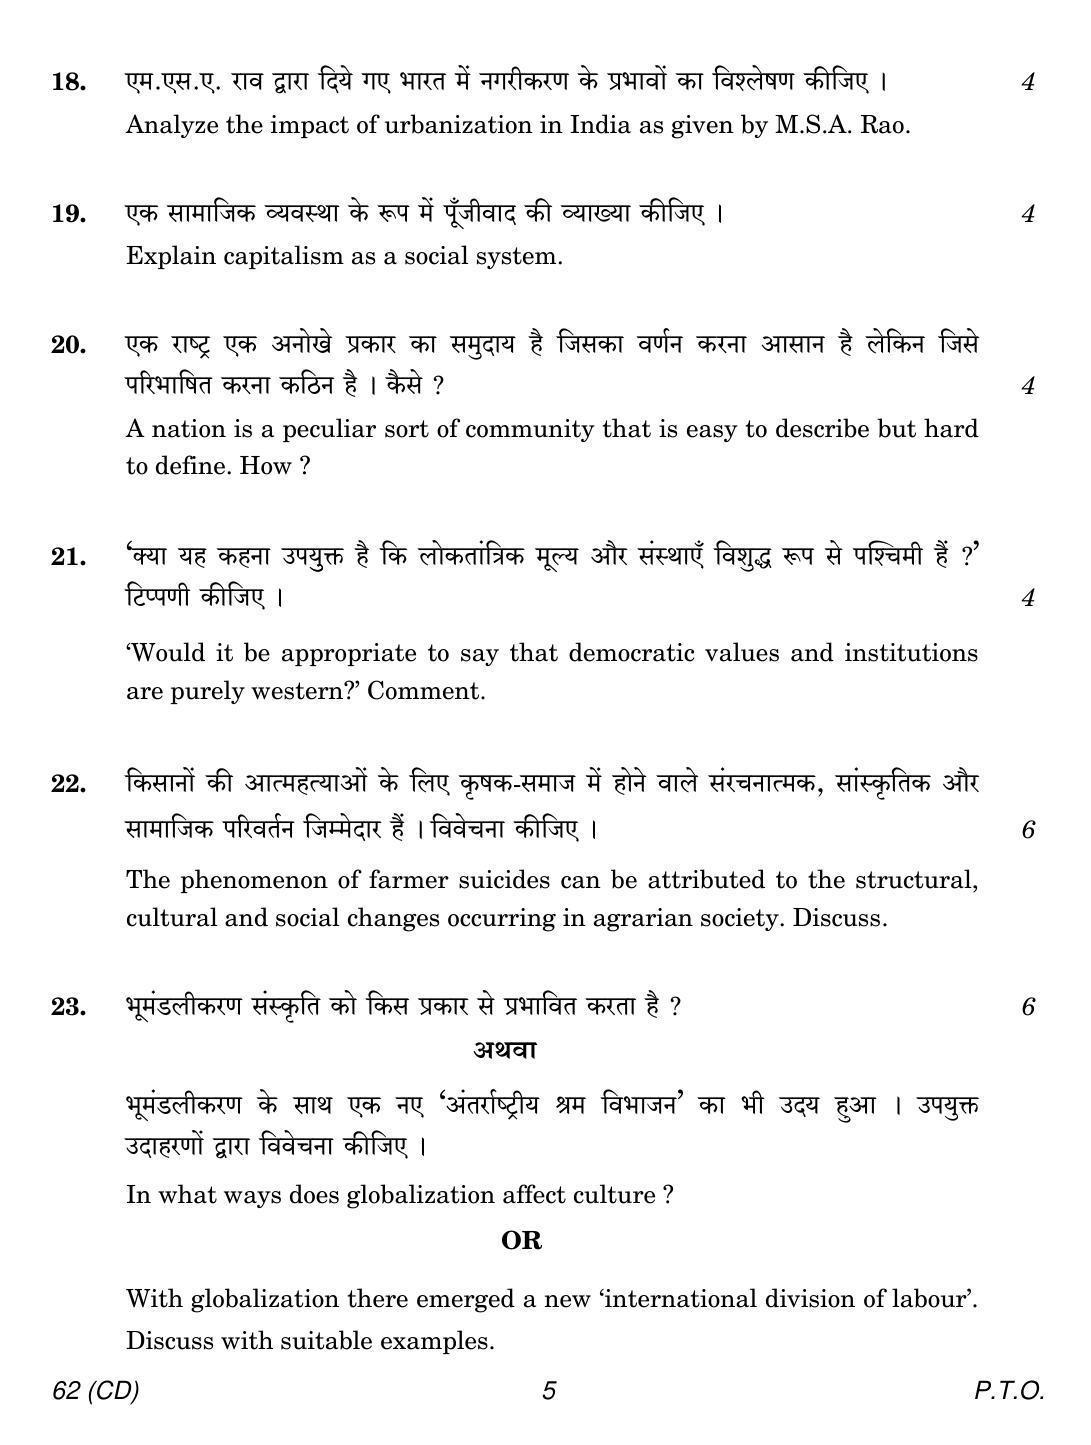 CBSE Class 12 62 SOCIOLOGY CD 2018 Question Paper - Page 5